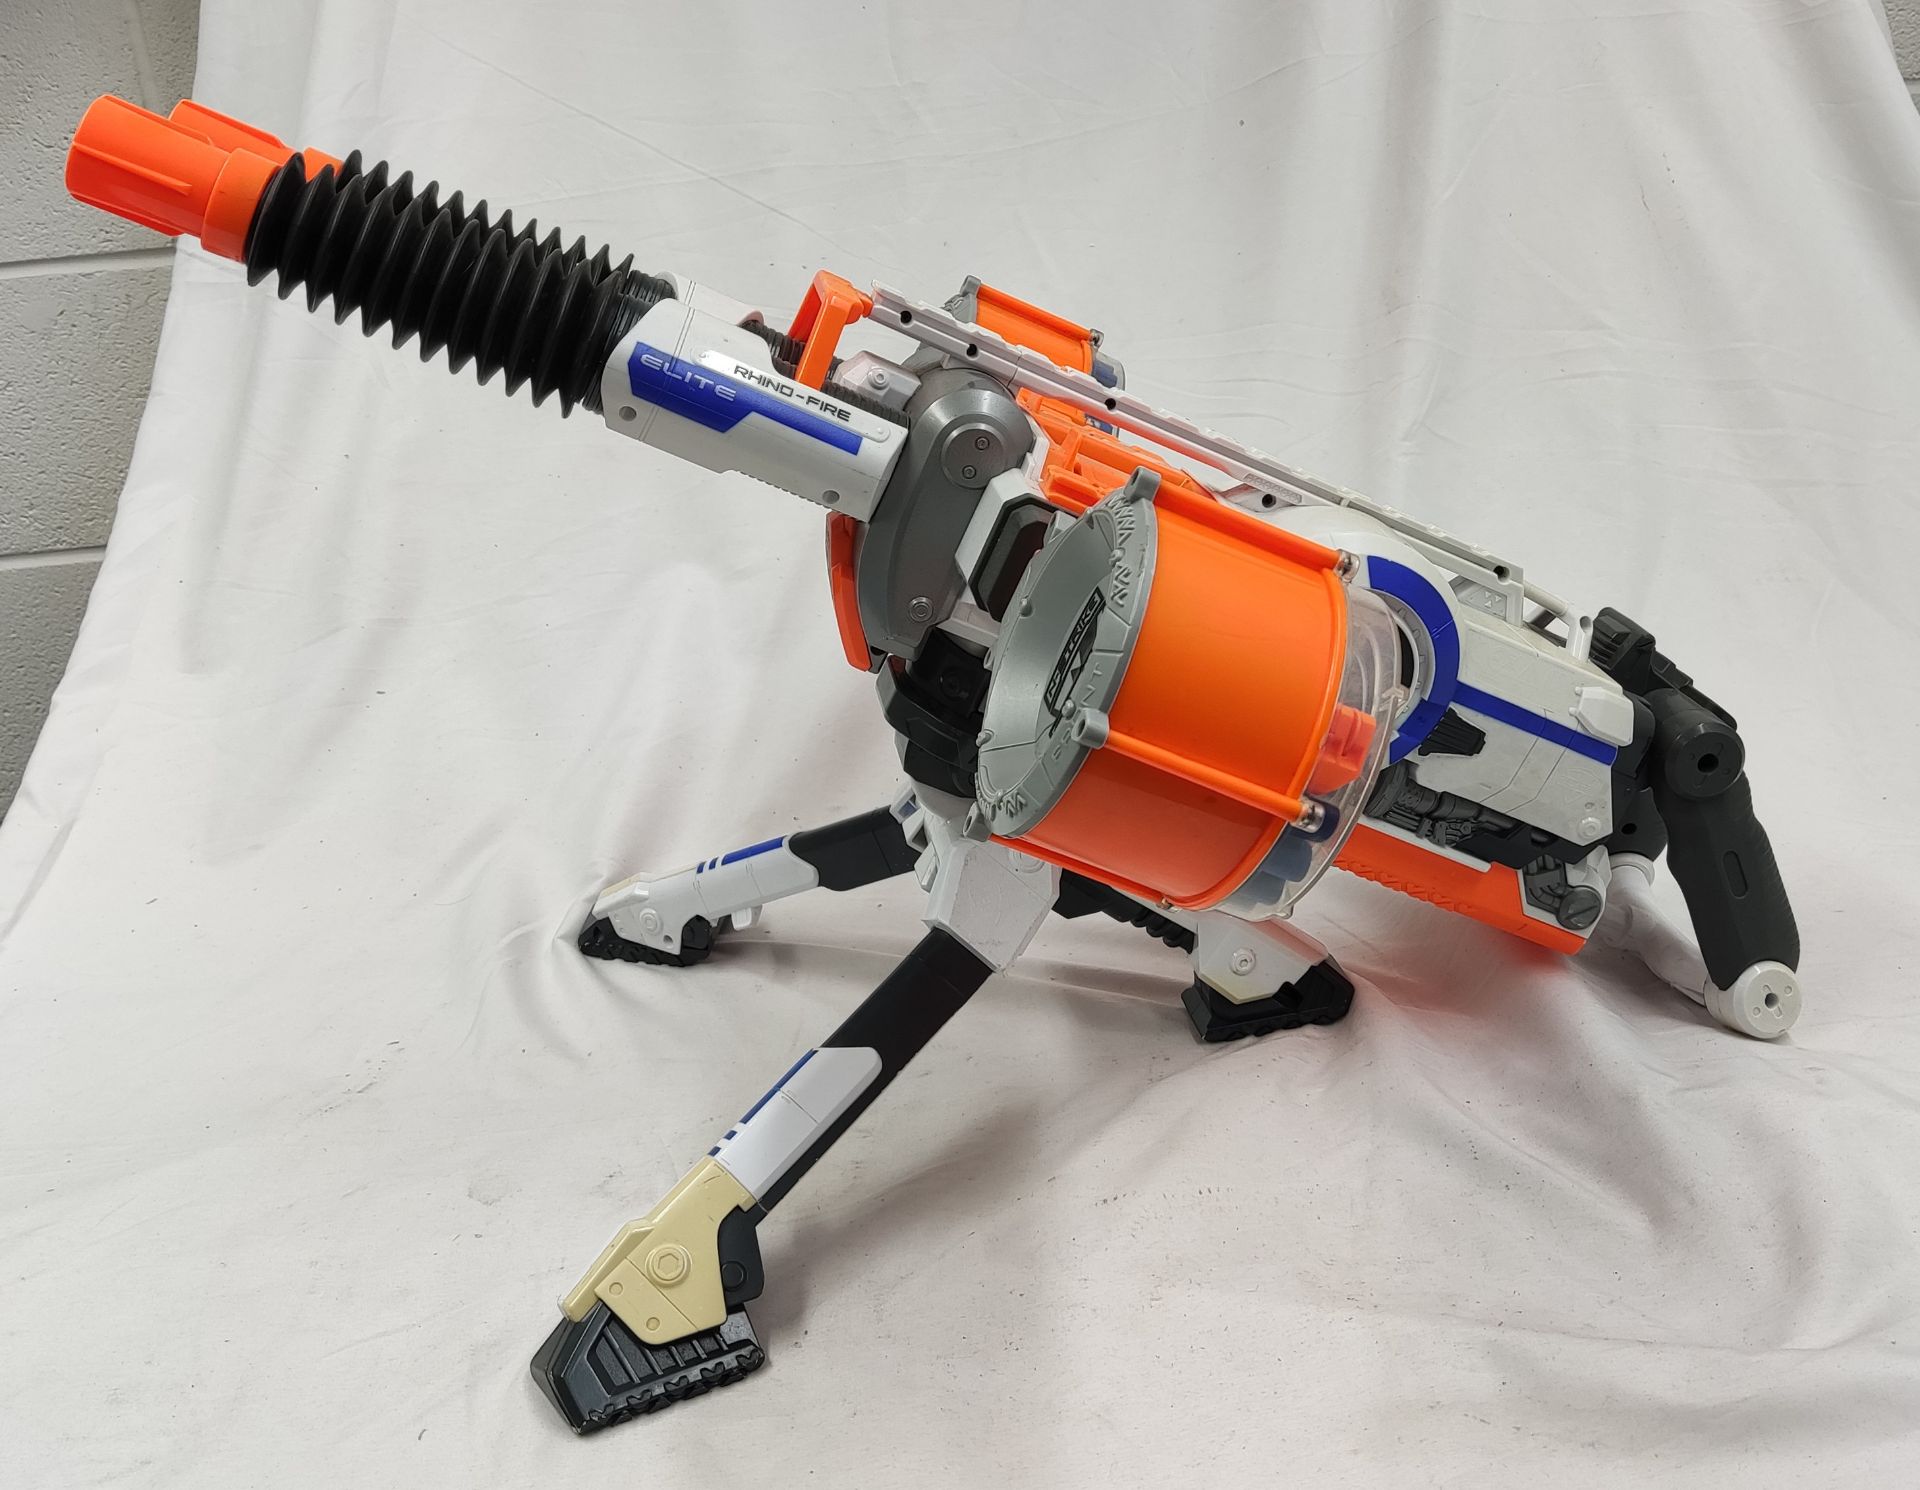 1 x Nerf Rhino-Fire Electric Nerf Gun with Moving Barrels - Used - CL444 - NO VAT ON THE HAMMER - - Image 3 of 12